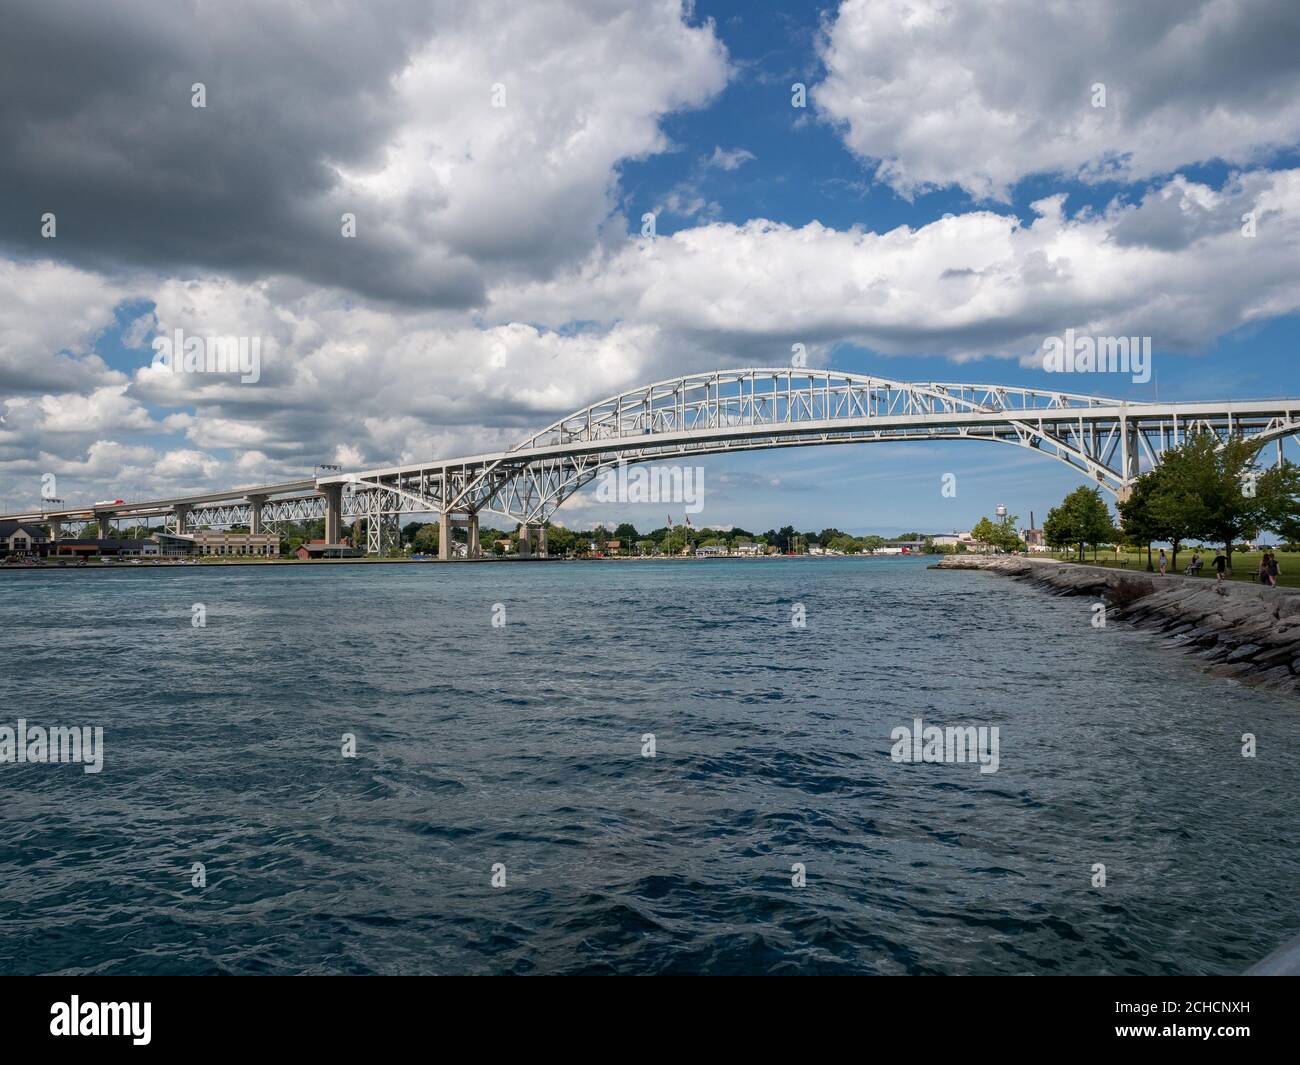 Under The Blue Water Bridge Spanning The St Clair River In Sarnia Ontario Canada The International Crossing Point On The Canadian U.S. Border Stock Photo